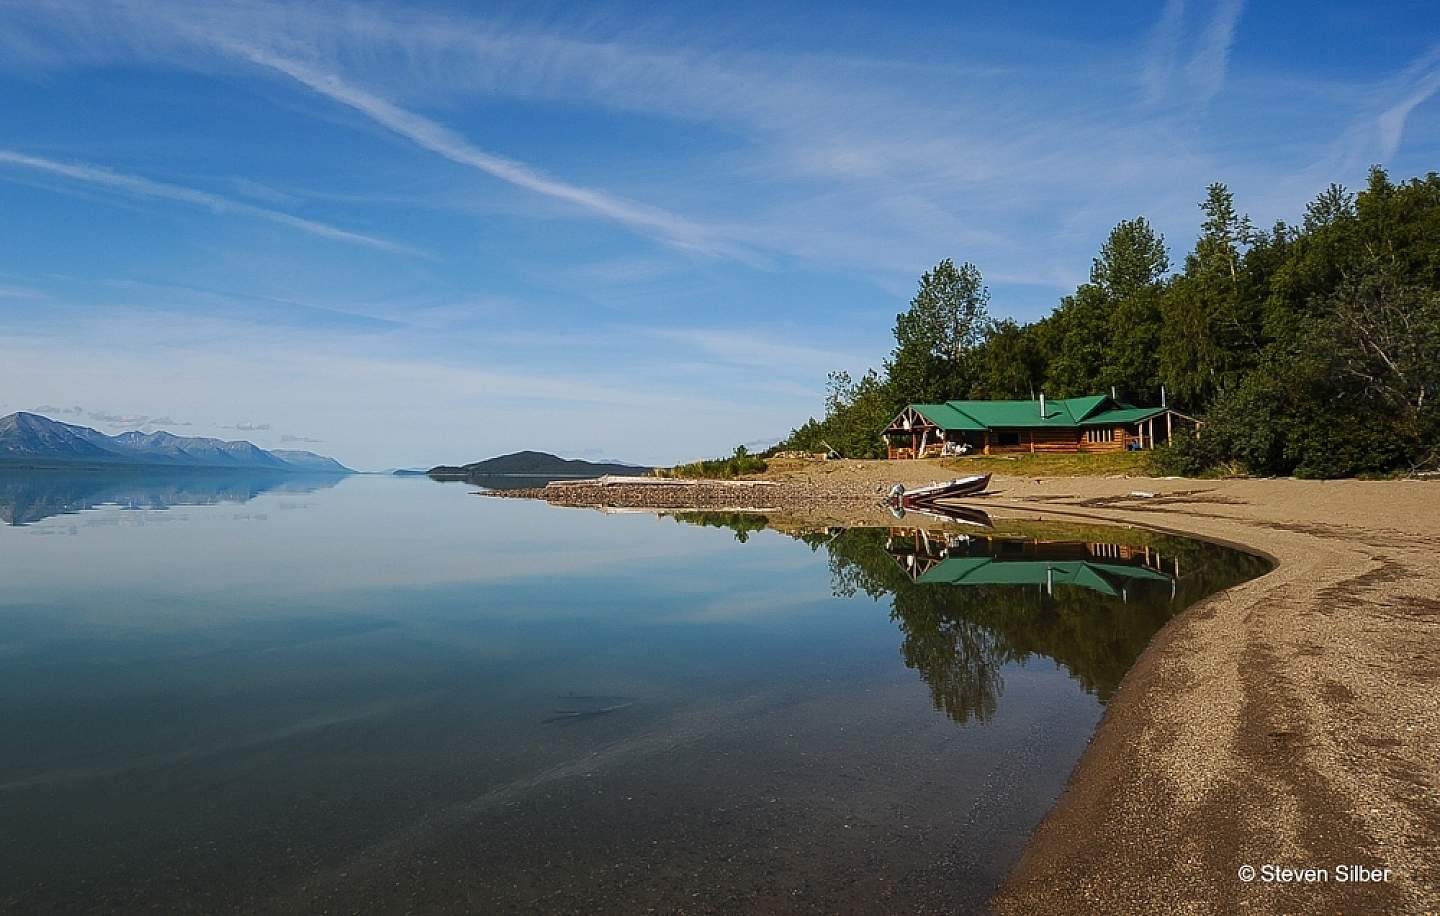 Located on the shores of Lake Clark, this all-inclusive lodge offers fishing, bear viewing, and even facilities for artists looking for inspiration